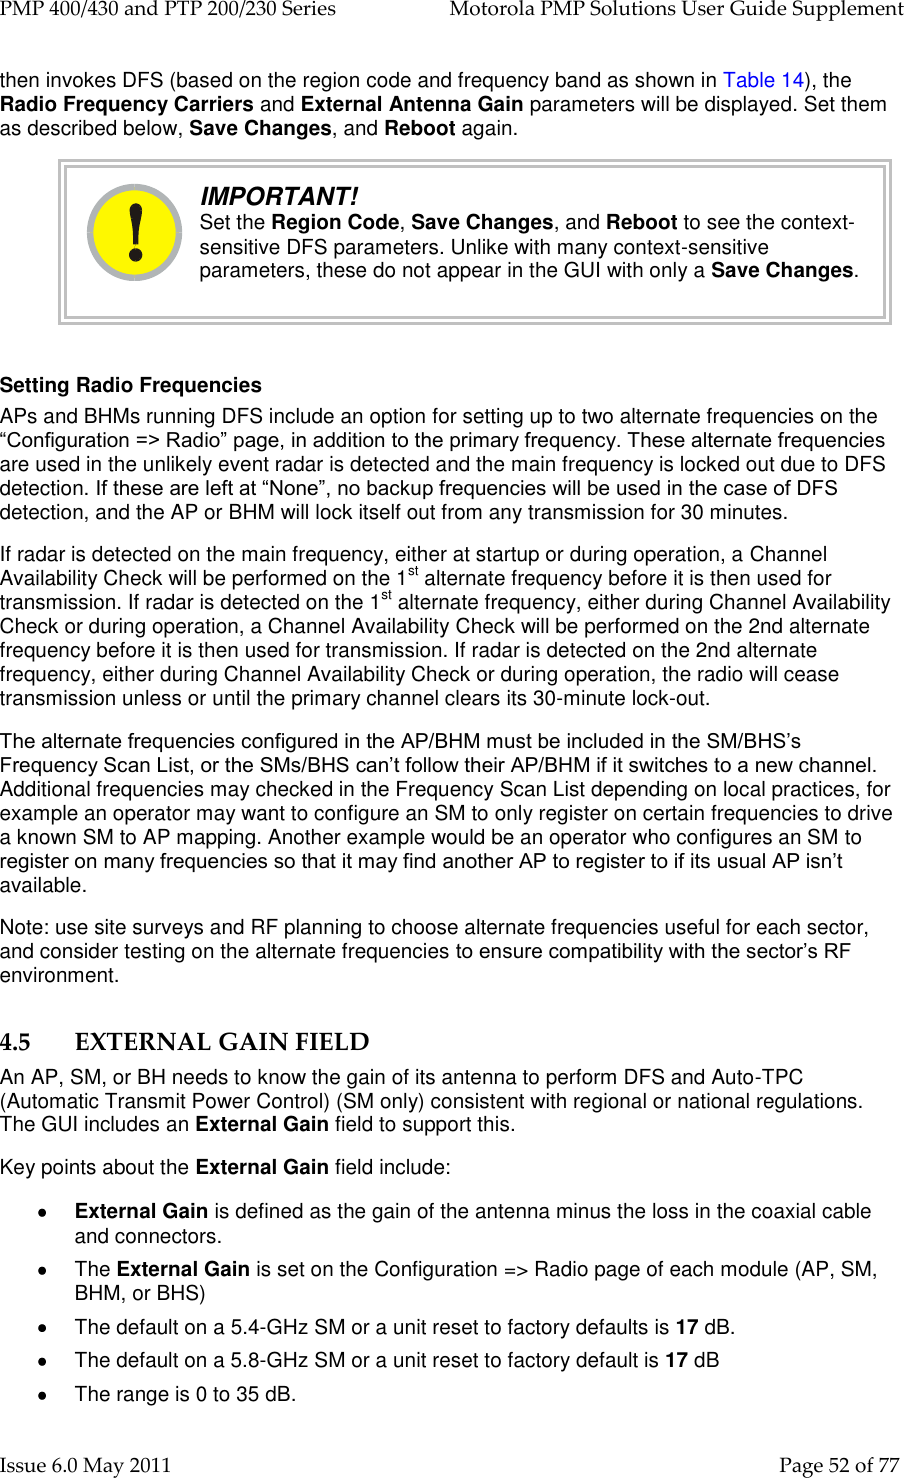 PMP 400/430 and PTP 200/230 Series   Motorola PMP Solutions User Guide Supplement Issue 6.0 May 2011    Page 52 of 77 then invokes DFS (based on the region code and frequency band as shown in Table 14), the Radio Frequency Carriers and External Antenna Gain parameters will be displayed. Set them as described below, Save Changes, and Reboot again.  IMPORTANT! Set the Region Code, Save Changes, and Reboot to see the context-sensitive DFS parameters. Unlike with many context-sensitive parameters, these do not appear in the GUI with only a Save Changes.  Setting Radio Frequencies APs and BHMs running DFS include an option for setting up to two alternate frequencies on the “Configuration =&gt; Radio” page, in addition to the primary frequency. These alternate frequencies are used in the unlikely event radar is detected and the main frequency is locked out due to DFS detection. If these are left at “None”, no backup frequencies will be used in the case of DFS detection, and the AP or BHM will lock itself out from any transmission for 30 minutes. If radar is detected on the main frequency, either at startup or during operation, a Channel Availability Check will be performed on the 1st alternate frequency before it is then used for transmission. If radar is detected on the 1st alternate frequency, either during Channel Availability Check or during operation, a Channel Availability Check will be performed on the 2nd alternate frequency before it is then used for transmission. If radar is detected on the 2nd alternate frequency, either during Channel Availability Check or during operation, the radio will cease transmission unless or until the primary channel clears its 30-minute lock-out. The alternate frequencies configured in the AP/BHM must be included in the SM/BHS’s Frequency Scan List, or the SMs/BHS can’t follow their AP/BHM if it switches to a new channel. Additional frequencies may checked in the Frequency Scan List depending on local practices, for example an operator may want to configure an SM to only register on certain frequencies to drive a known SM to AP mapping. Another example would be an operator who configures an SM to register on many frequencies so that it may find another AP to register to if its usual AP isn’t available. Note: use site surveys and RF planning to choose alternate frequencies useful for each sector, and consider testing on the alternate frequencies to ensure compatibility with the sector’s RF environment. 4.5 EXTERNAL GAIN FIELD An AP, SM, or BH needs to know the gain of its antenna to perform DFS and Auto-TPC (Automatic Transmit Power Control) (SM only) consistent with regional or national regulations. The GUI includes an External Gain field to support this. Key points about the External Gain field include:  External Gain is defined as the gain of the antenna minus the loss in the coaxial cable and connectors.   The External Gain is set on the Configuration =&gt; Radio page of each module (AP, SM, BHM, or BHS)    The default on a 5.4-GHz SM or a unit reset to factory defaults is 17 dB.   The default on a 5.8-GHz SM or a unit reset to factory default is 17 dB   The range is 0 to 35 dB. 